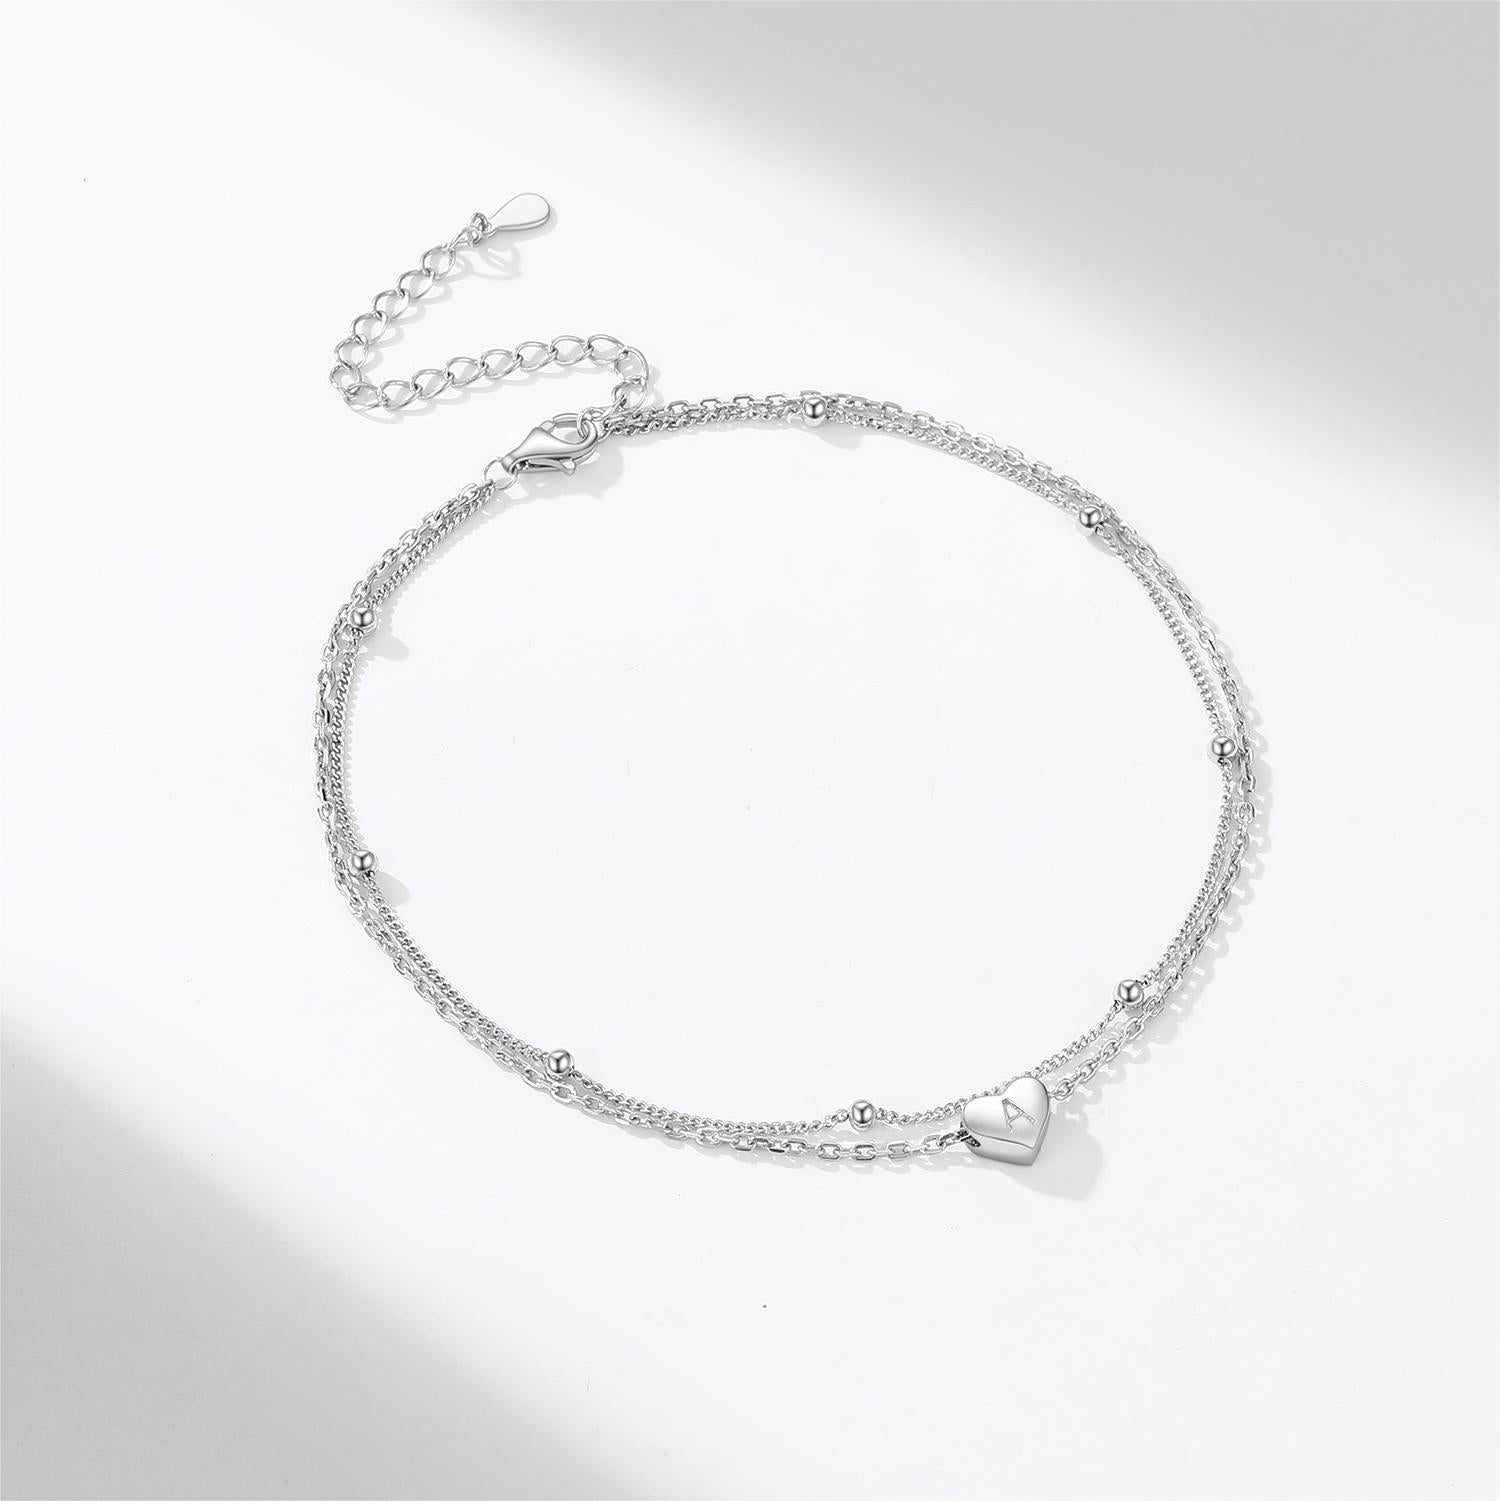 26 Initial Anklet in 925 Sterling Silver